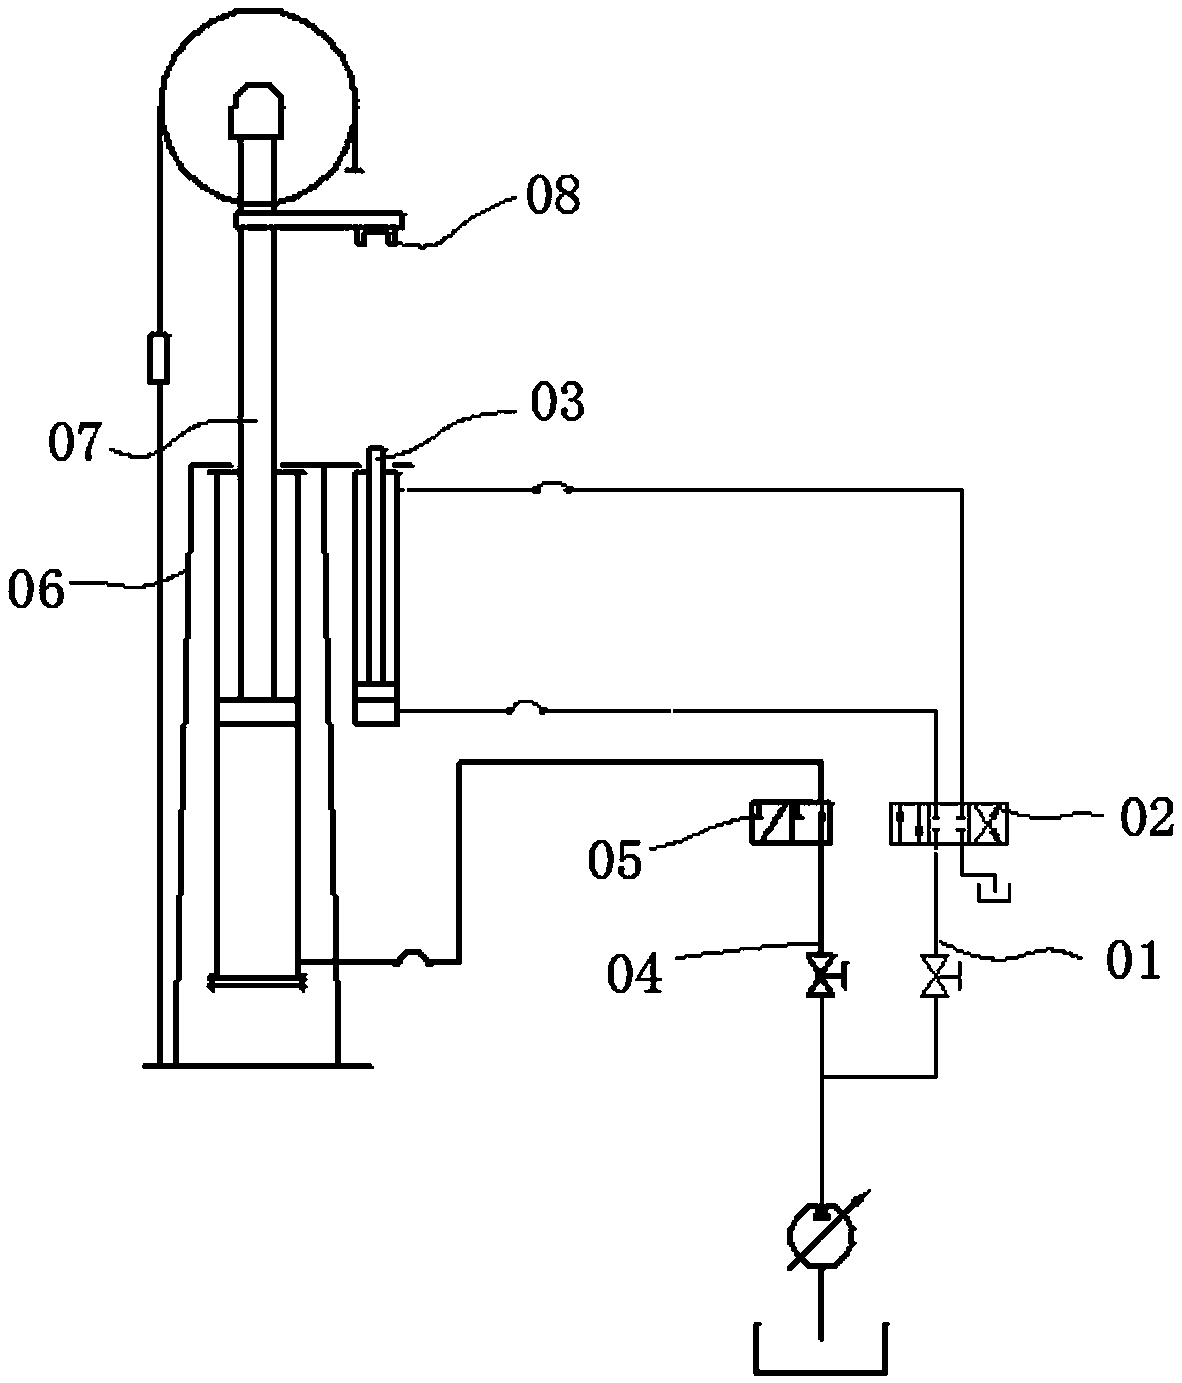 Hydraulic pumping unit and method for replacing oil cylinder piston seals without motor